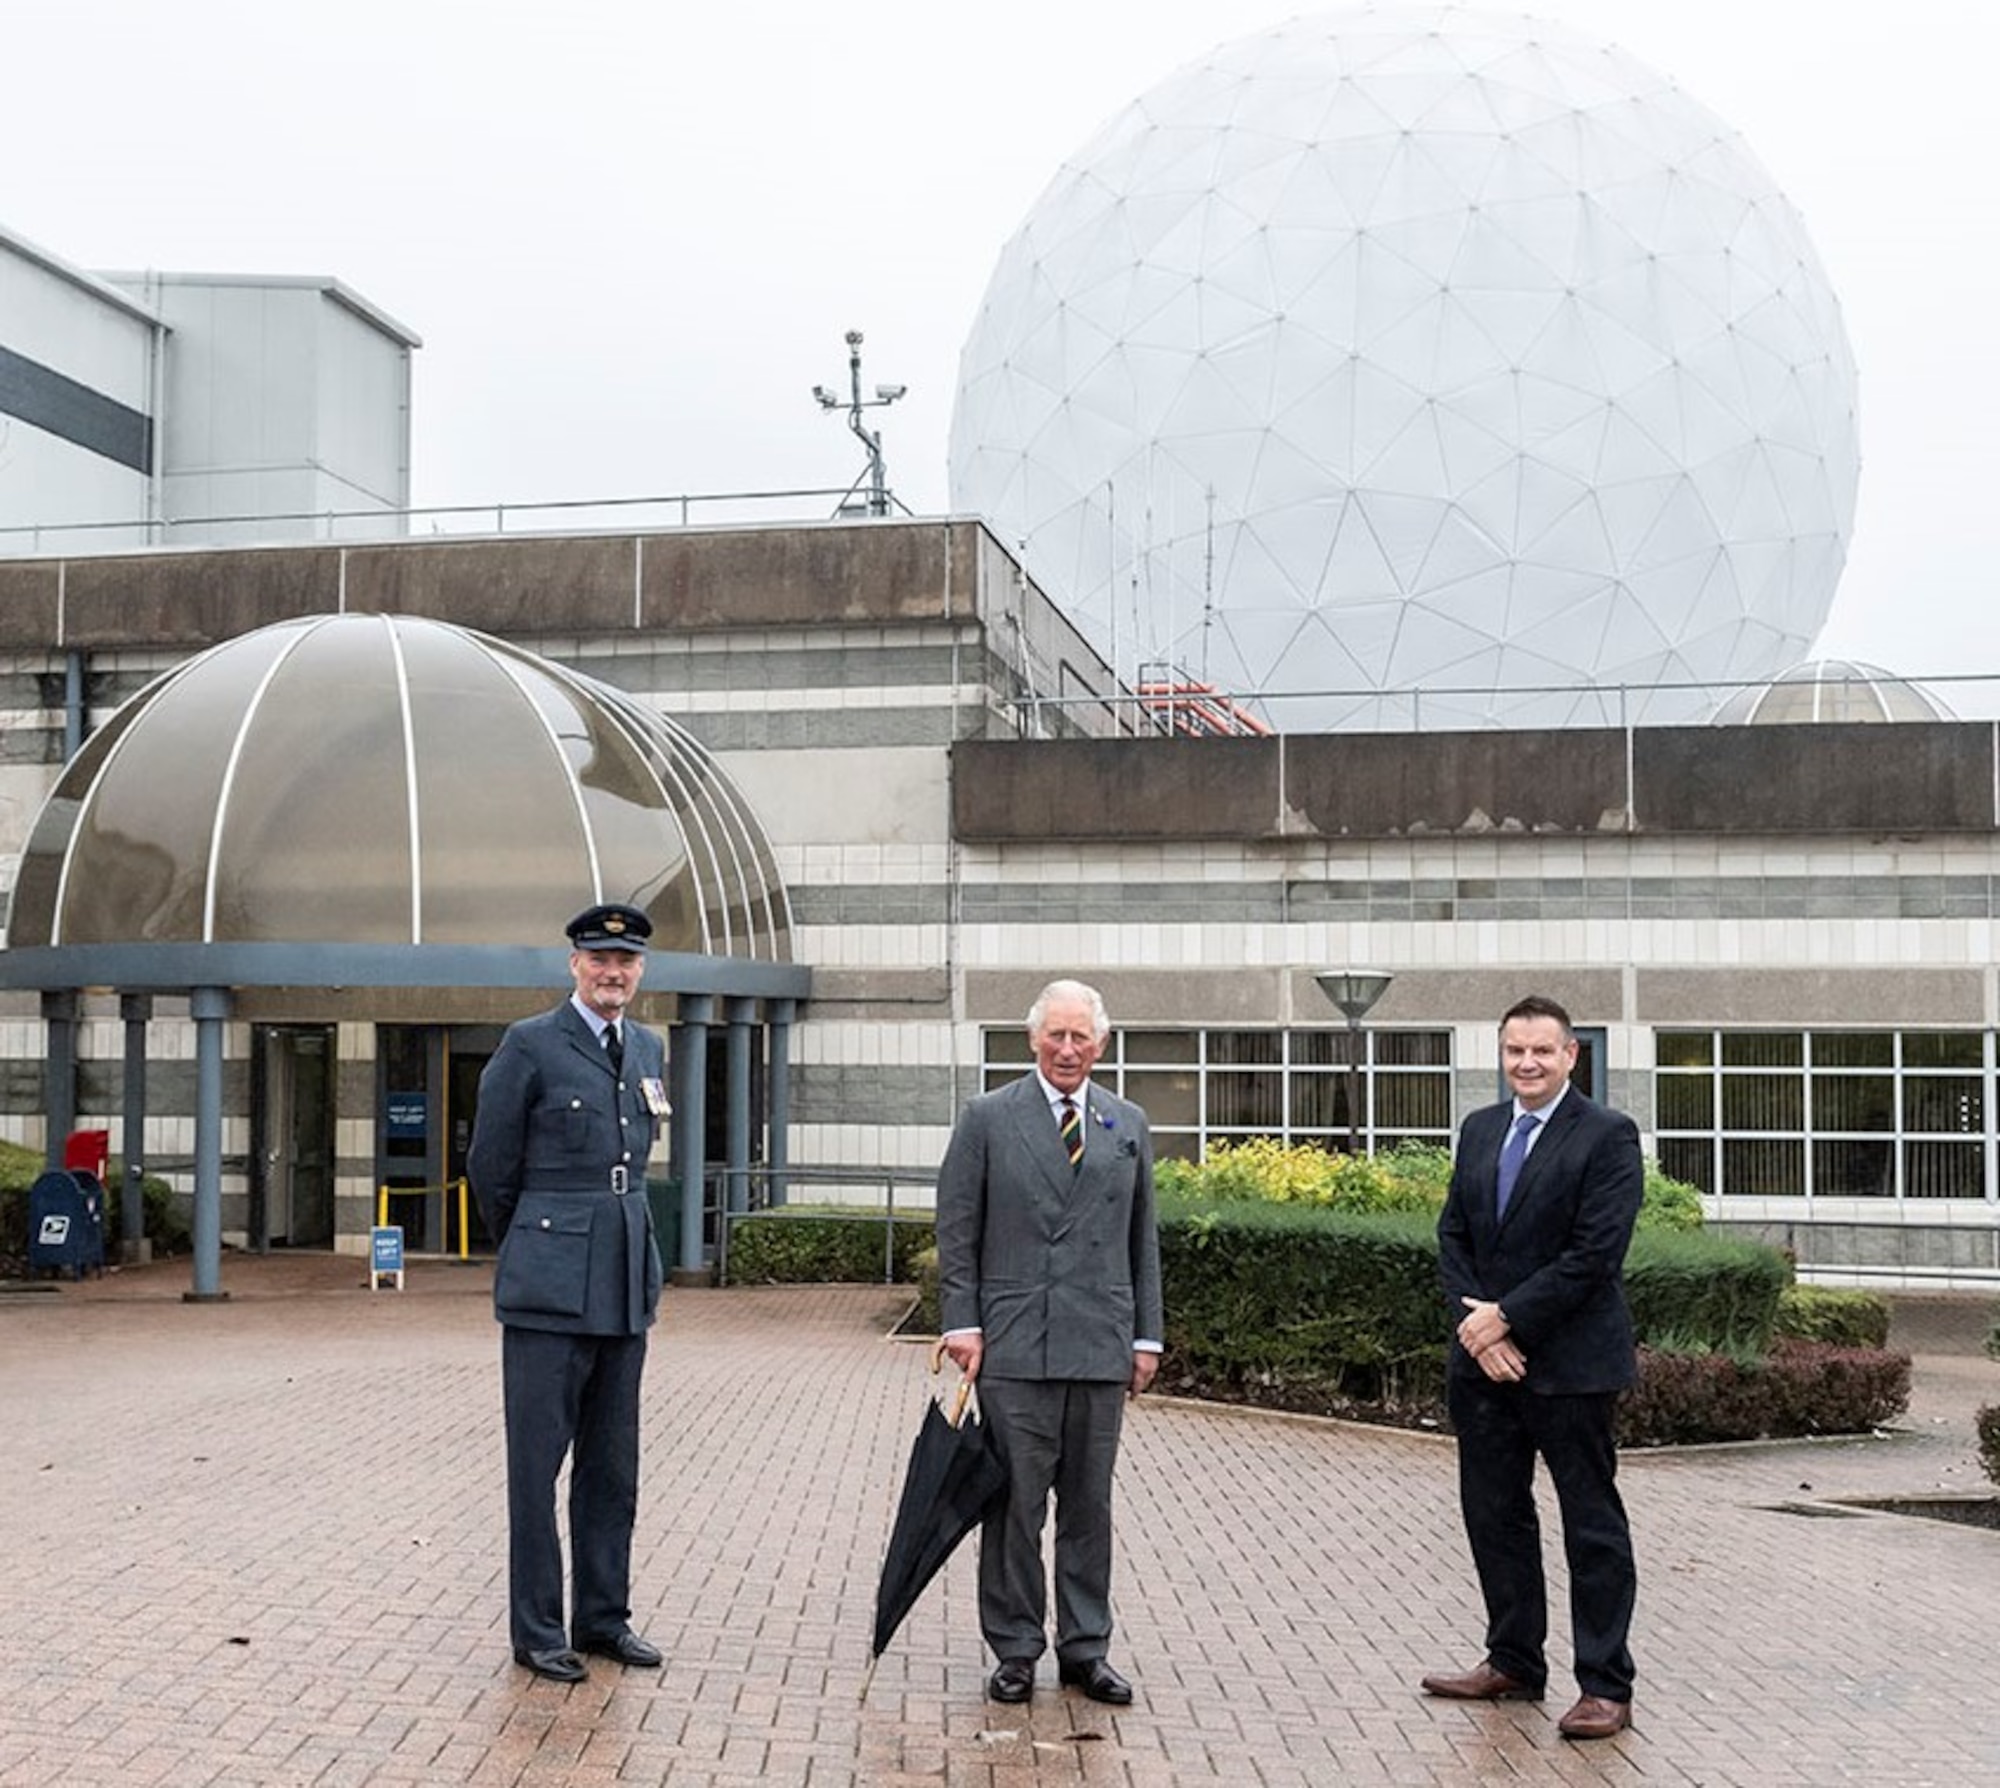 His Royal Highness, center, the Prince of Wales poses for a photo along with Squadron Leader Geoff Dickson, left, RAF Commander for RAF Menwith Hill and Mr Gav Smith, Director General of Technology, Government Communications Headquarters, at RAF Menwith Hill, England, Oct. 12, 2020. (Courtesy Photo)